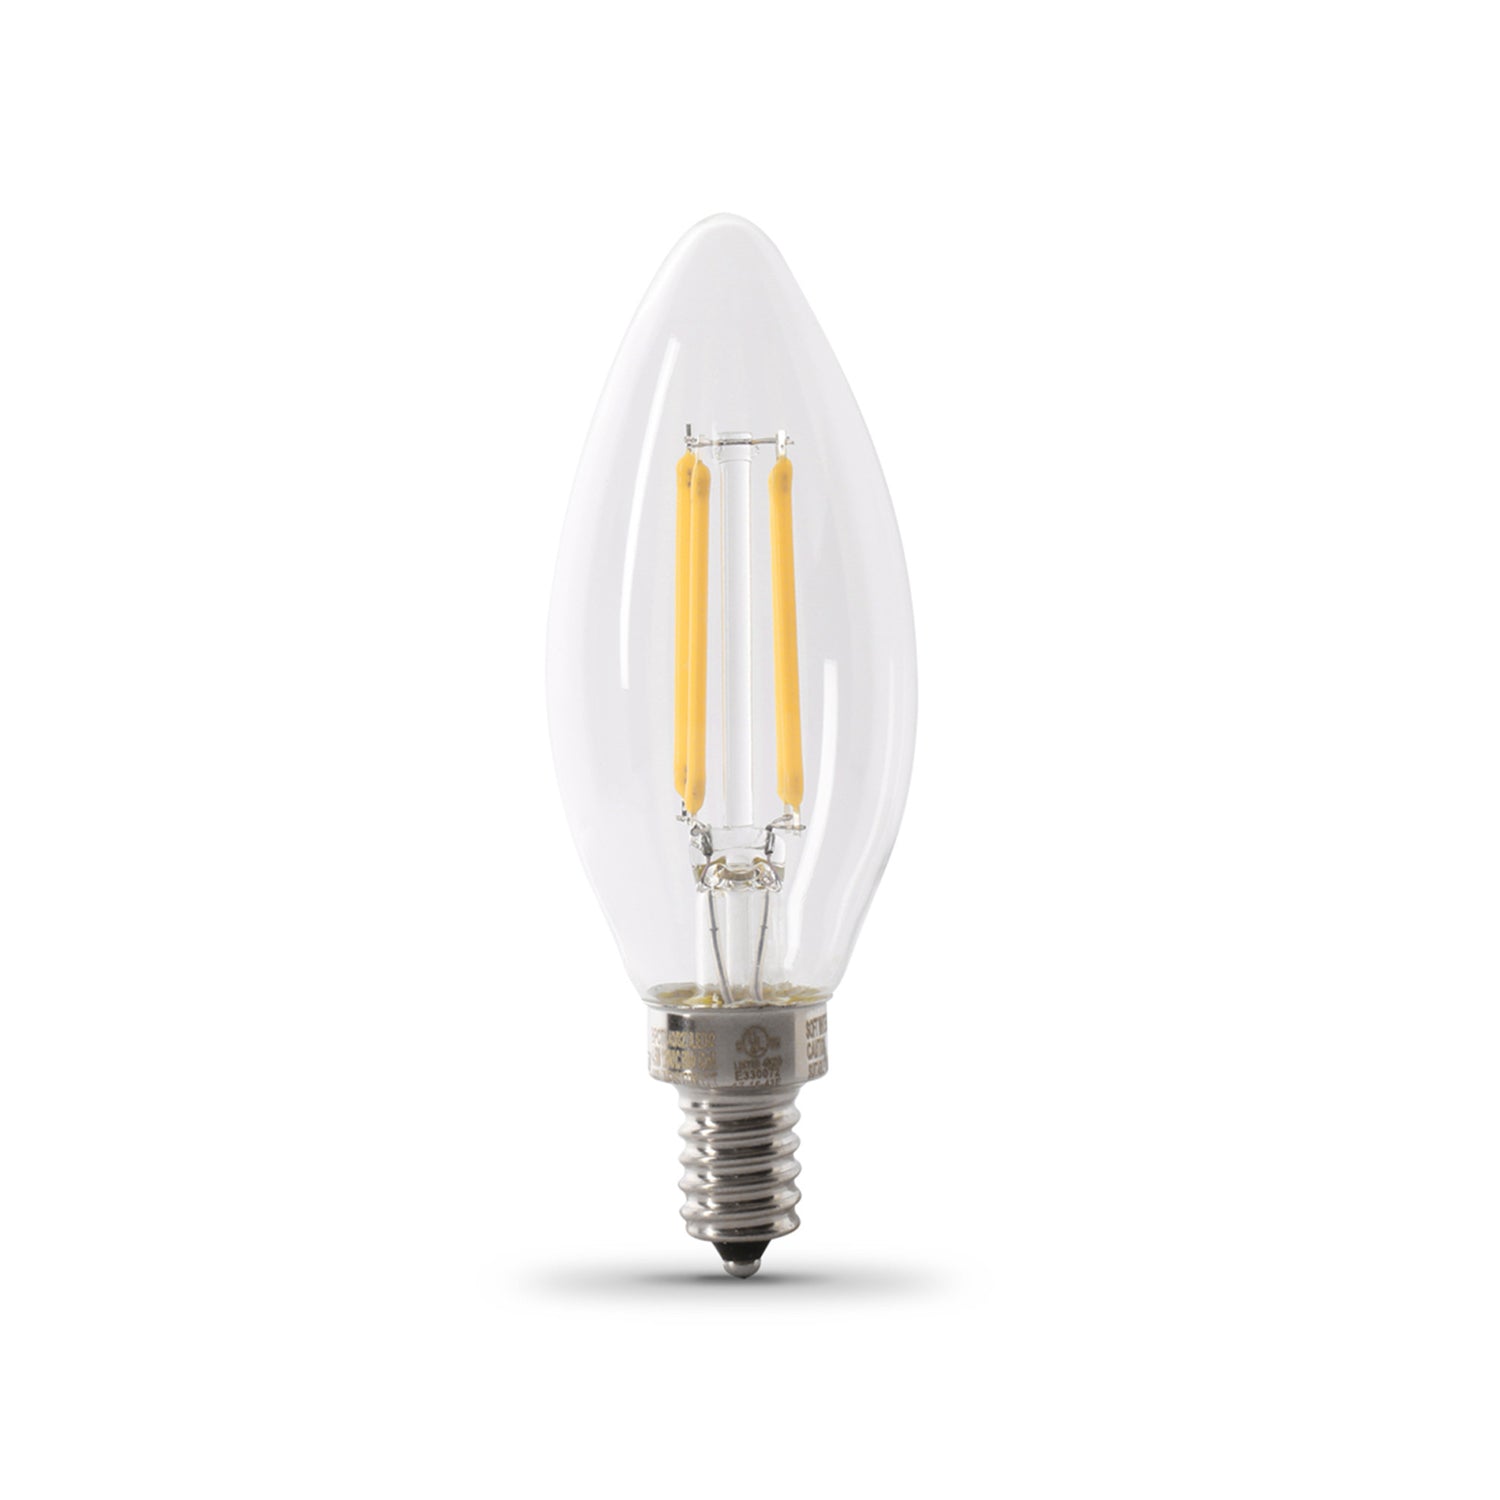 3.2W (40W Replacement) True White (3500K) E12 Base B10 Blunt Tip Dimmable Enhance Filament LED Bulb (6-Pack)